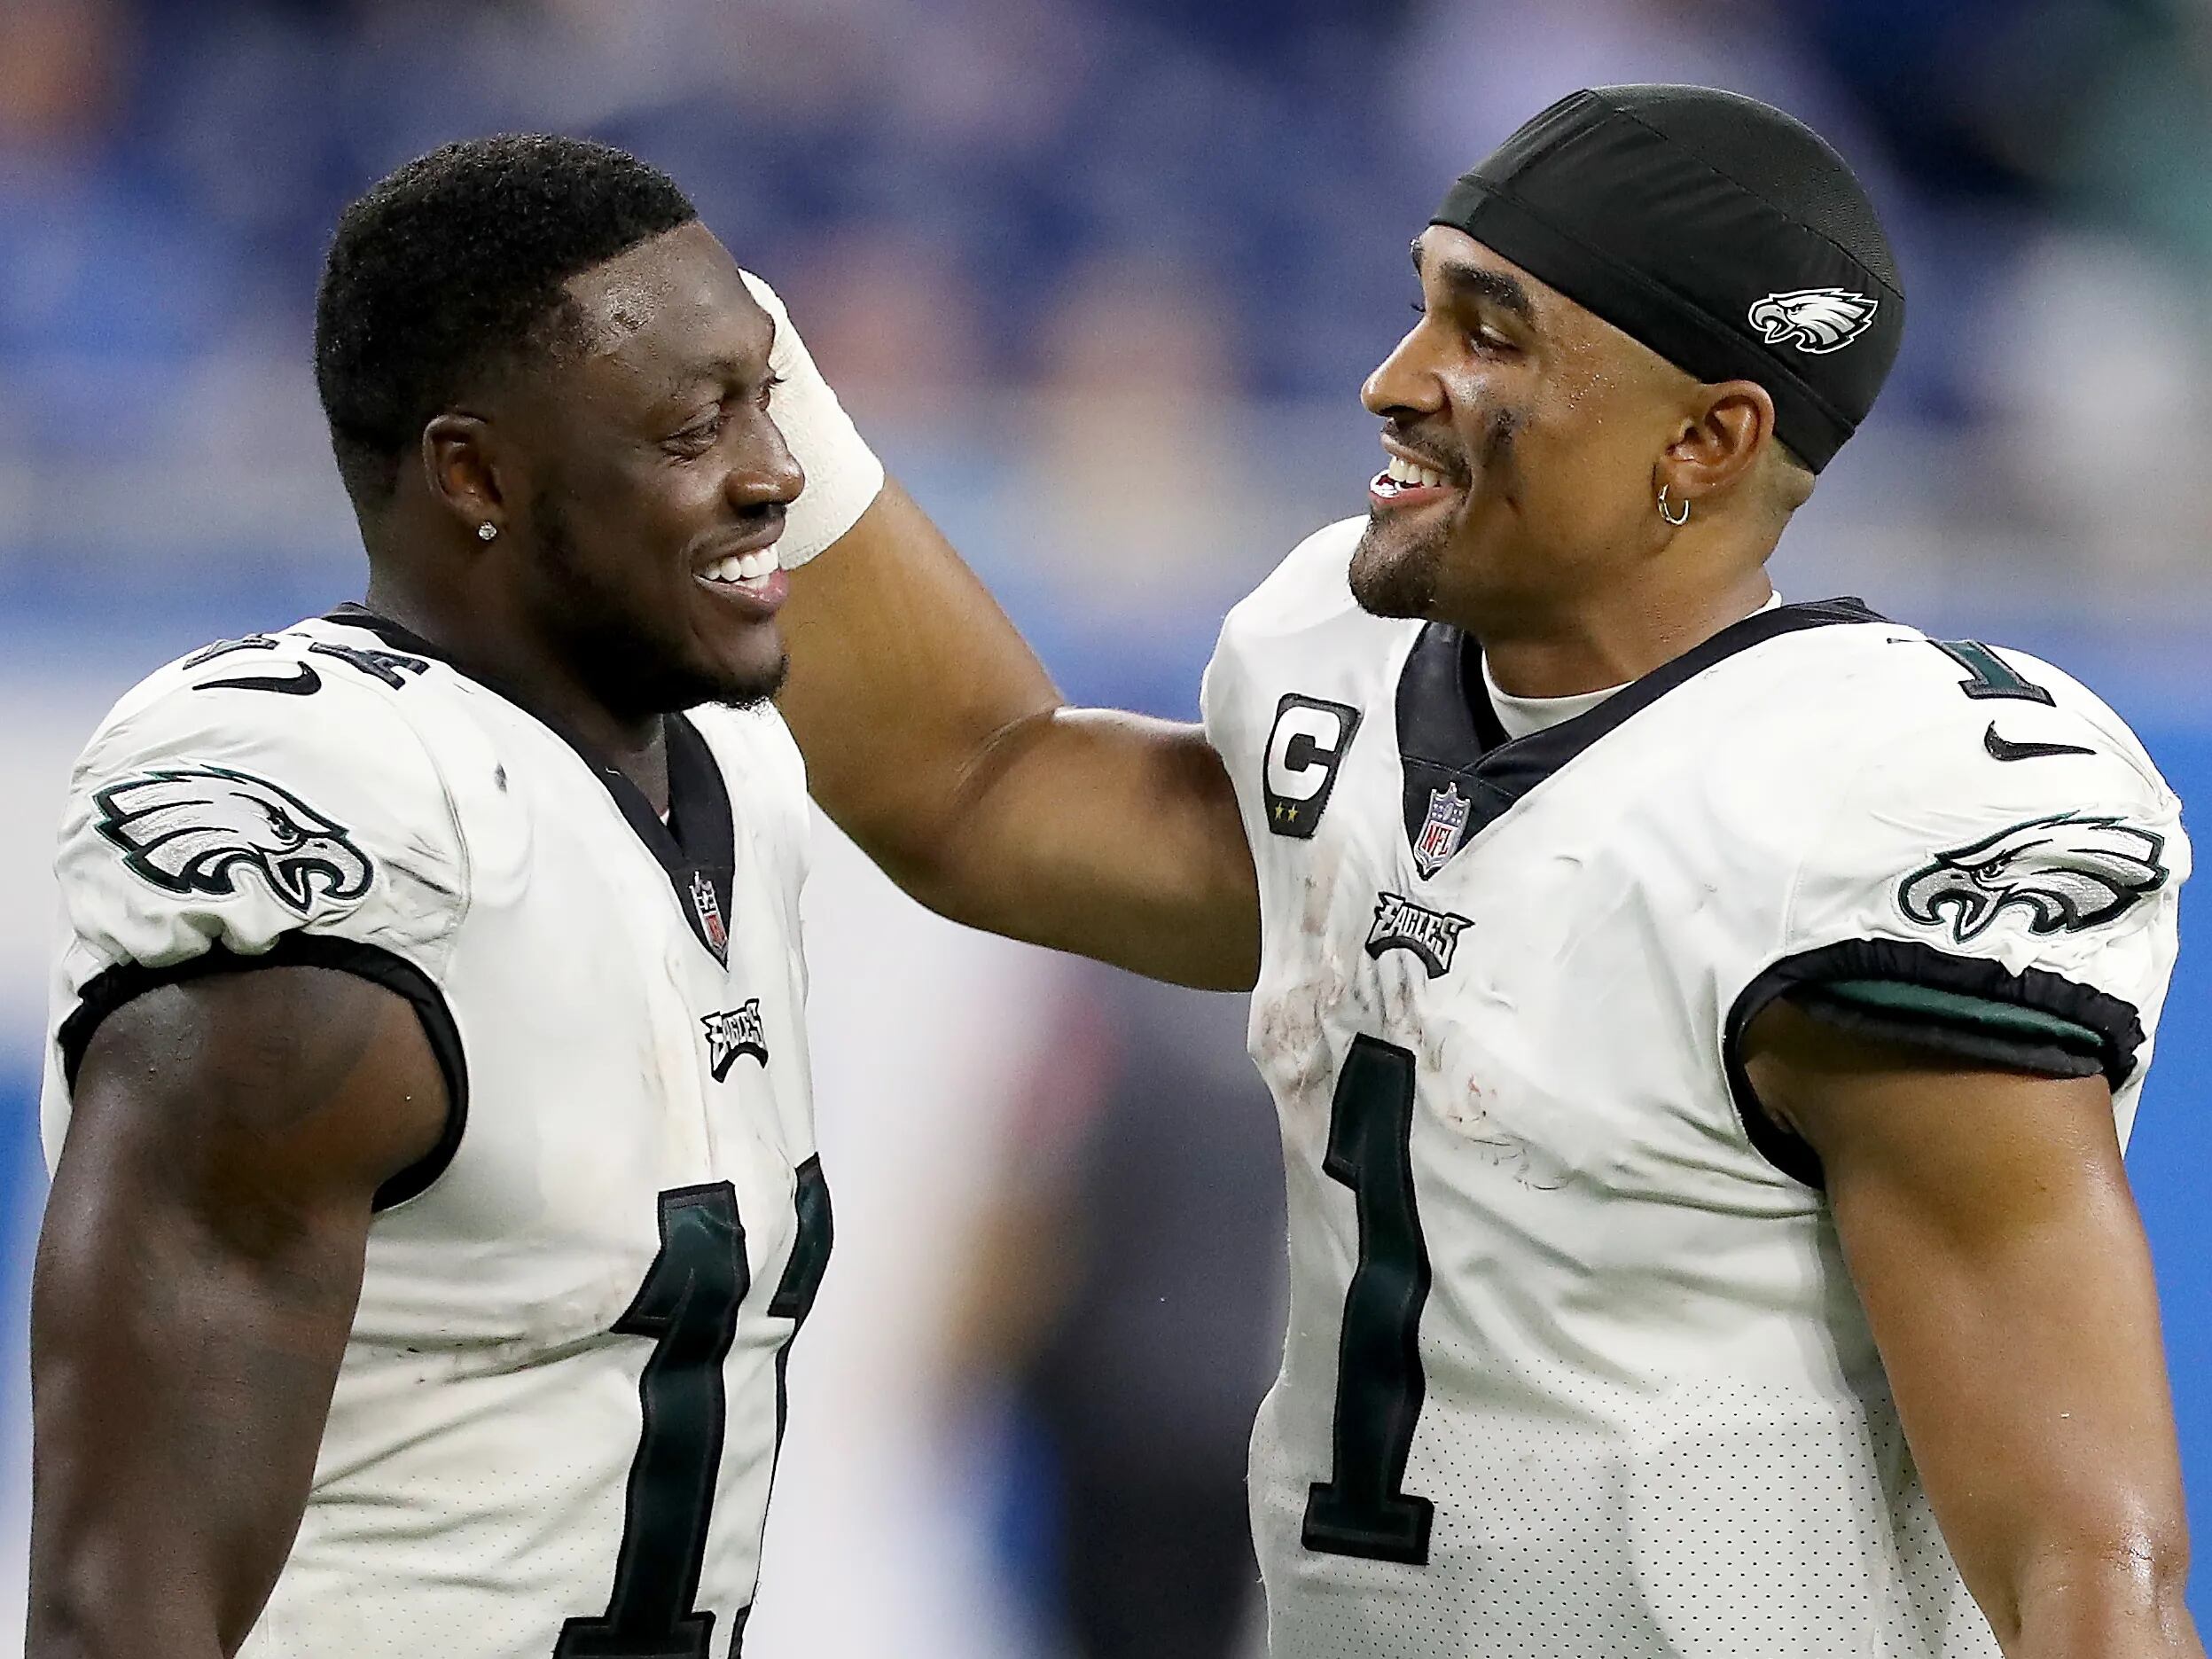 Eagles soar over Vikings, 24-7, in Monday night bout at The Linc